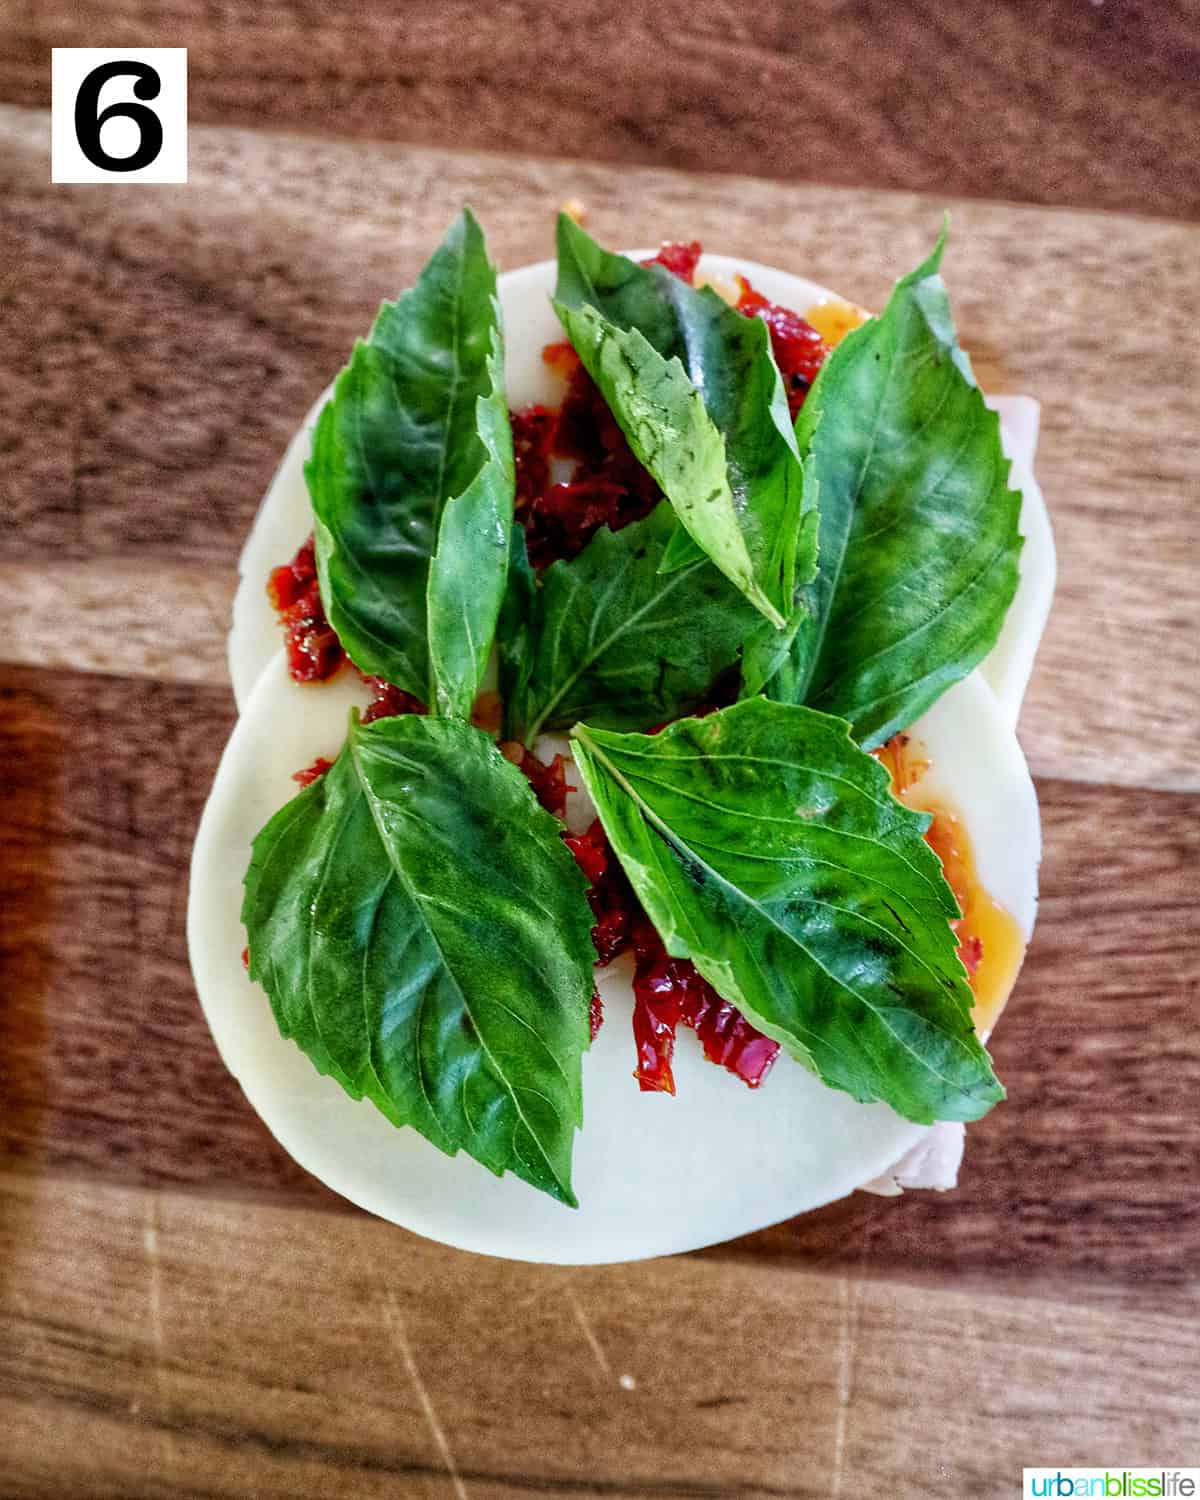 basil leaves on top of sundried tomatoes and provolone cheese on a cutting board.